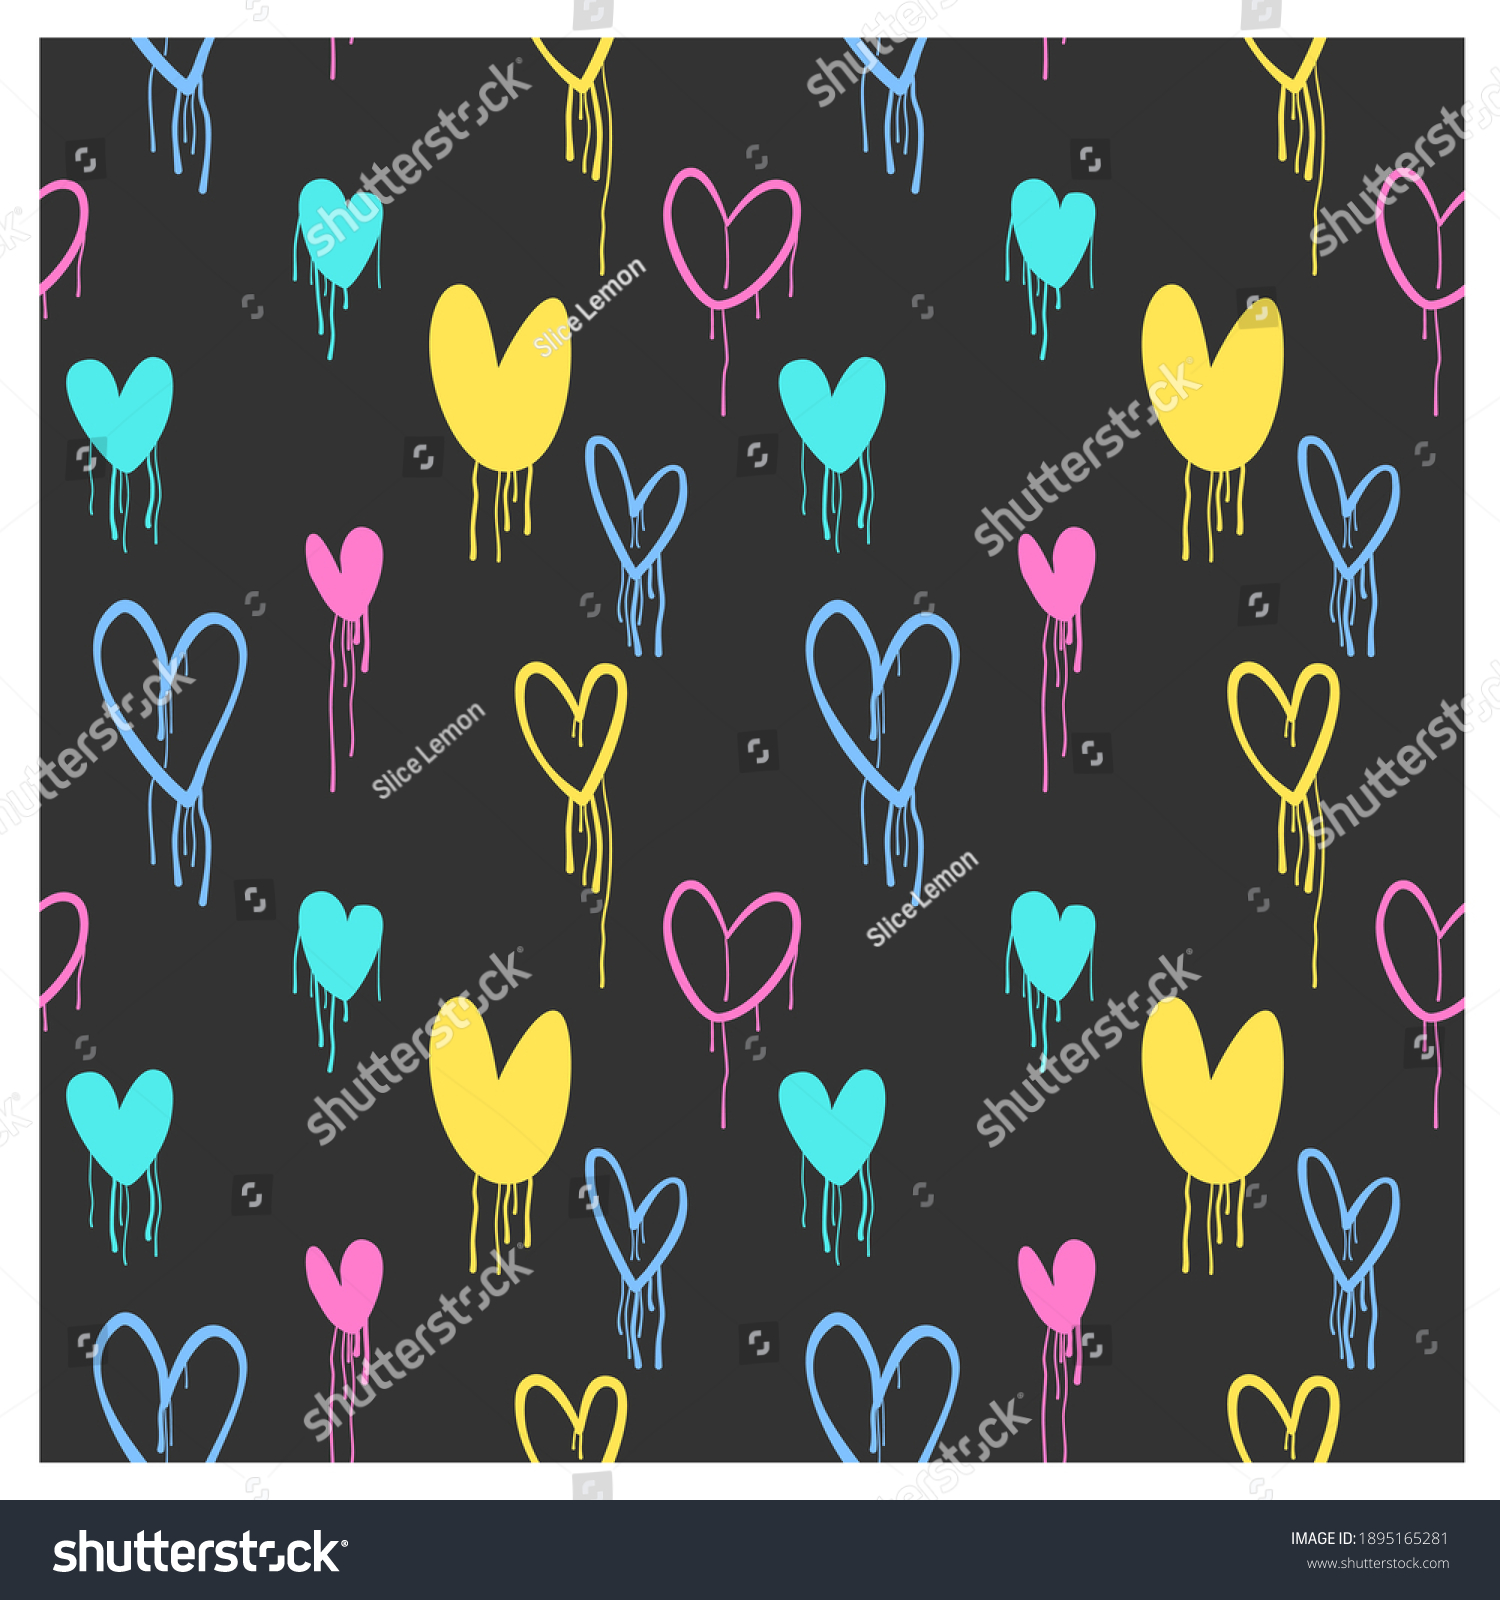 SVG of Seamless pattern of graffiti hearts with smudges. Image for a poster or cover. Vector illustration. Repeating texture. Figure for textiles. svg